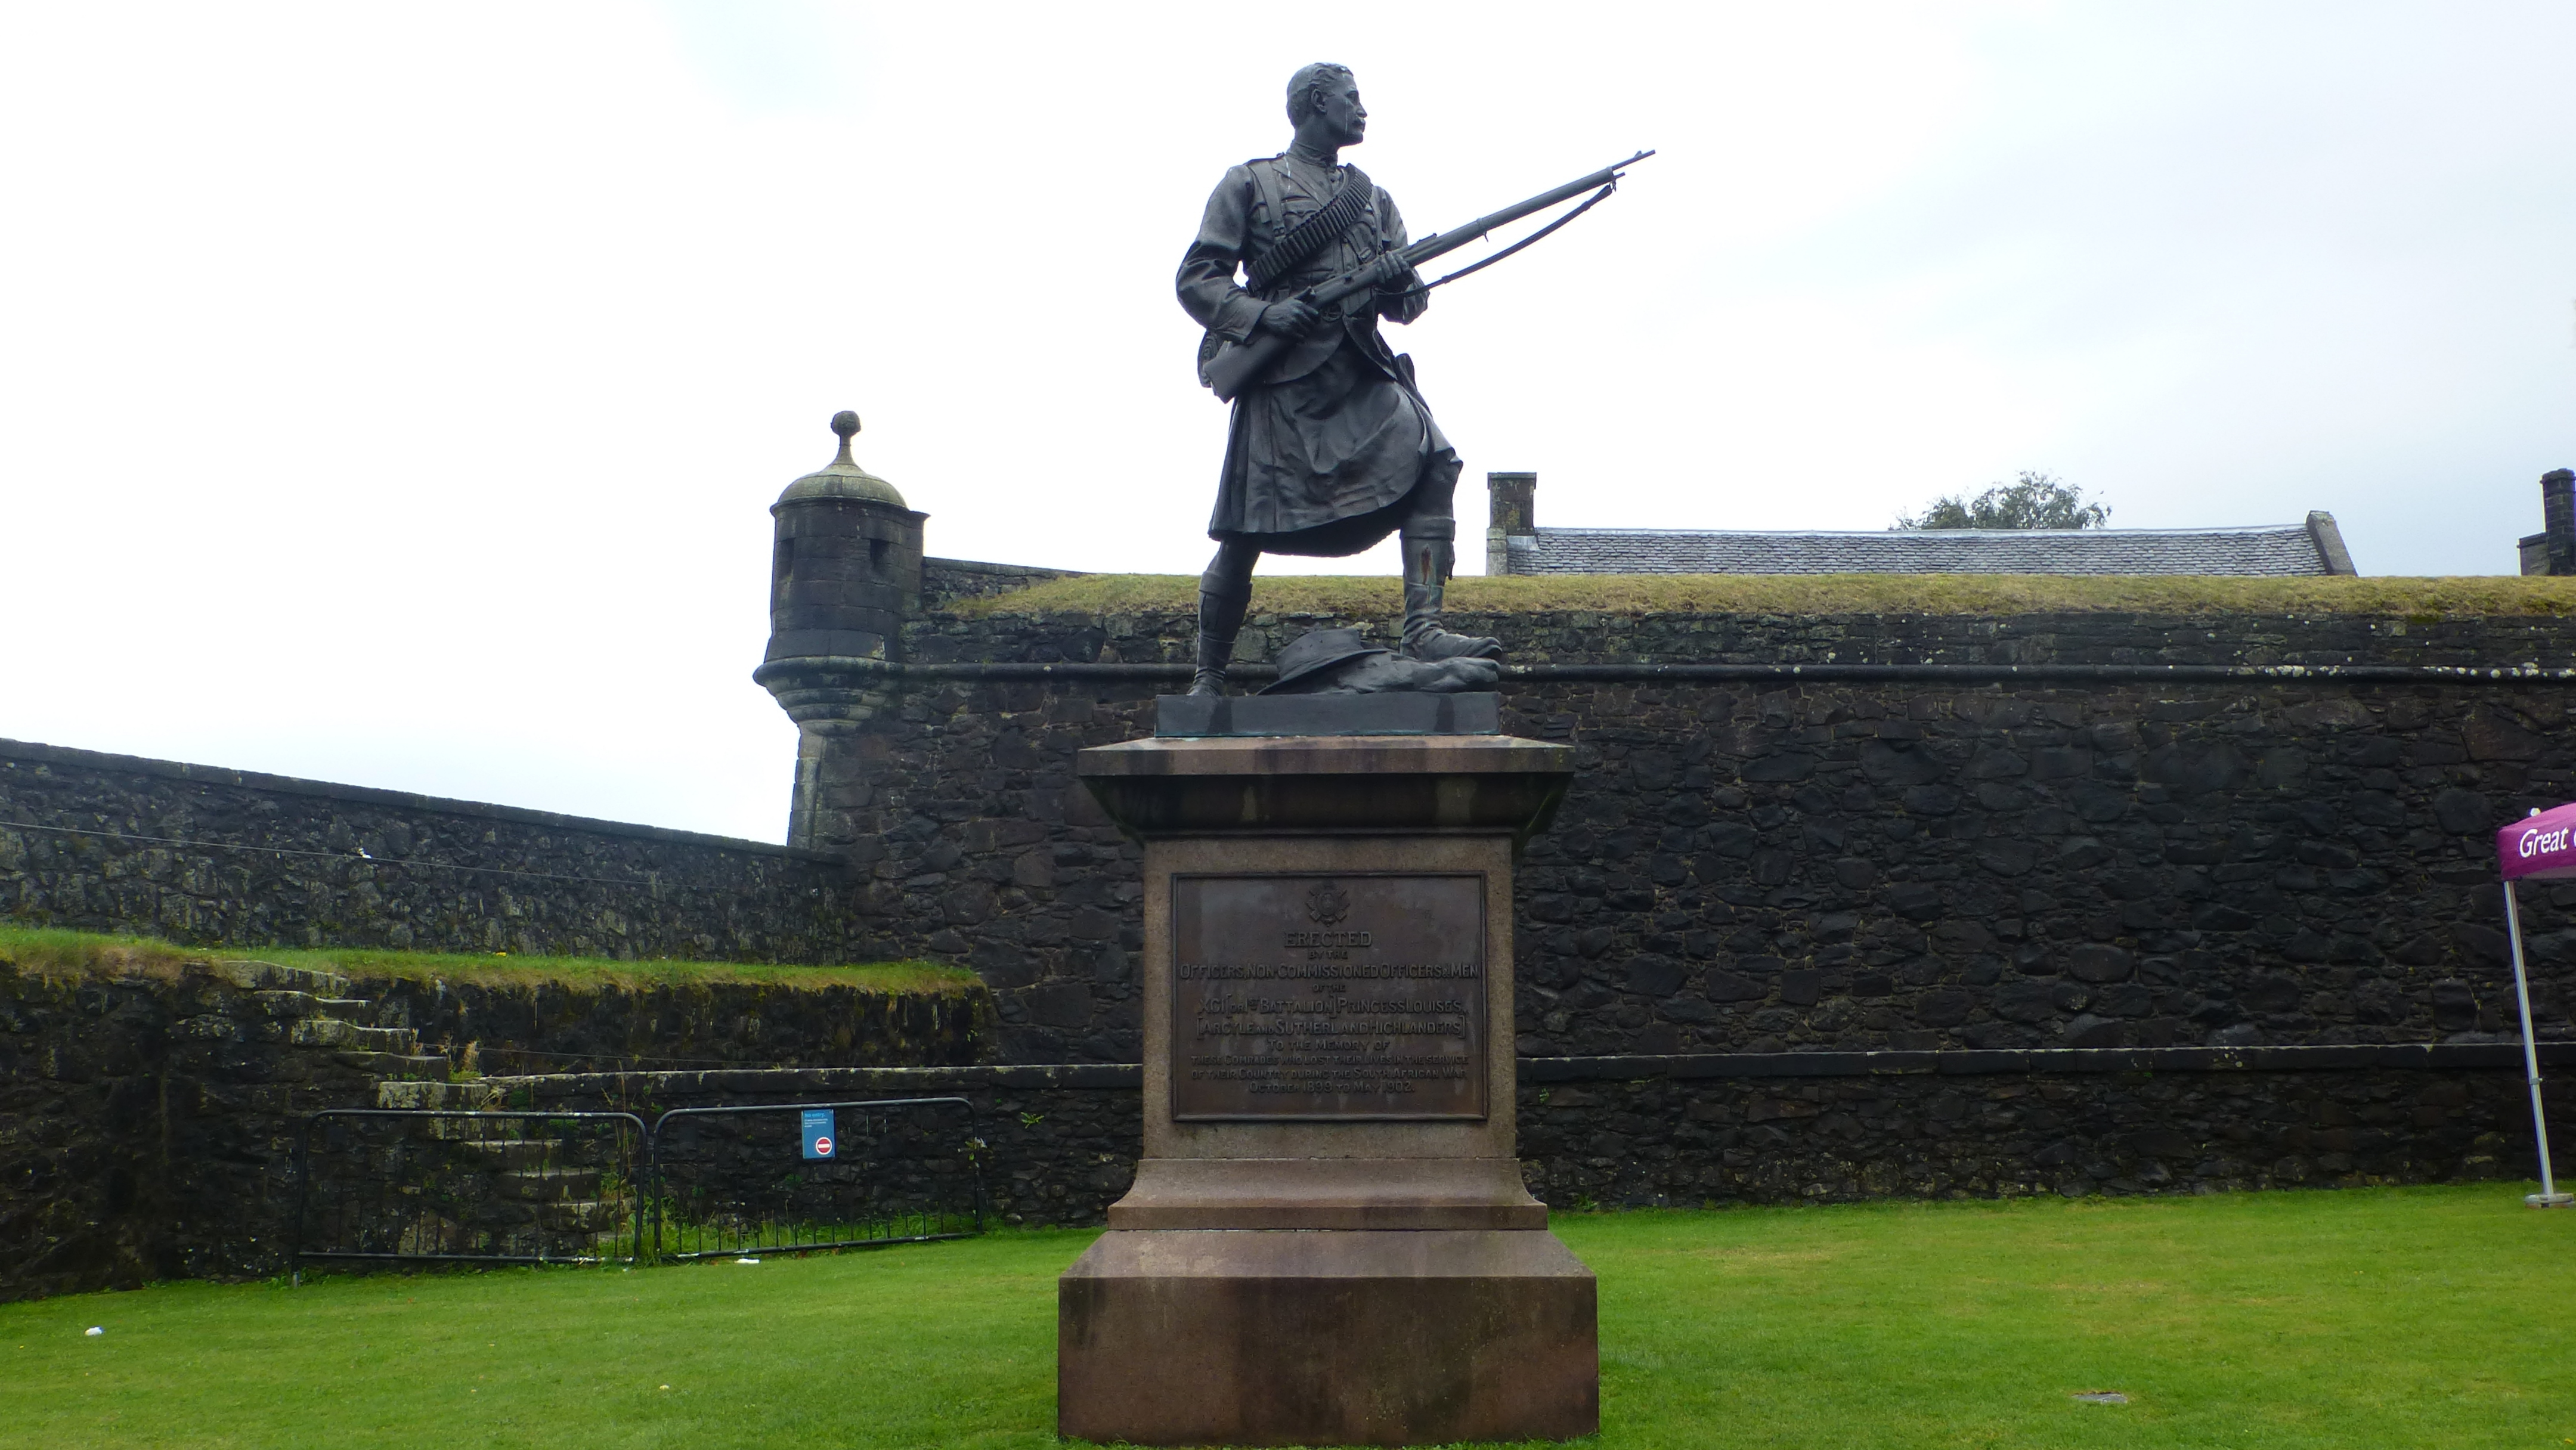 The Argyll and Sutherland Highlanders monument stands watch opposite Robert the Bruce. (2022)